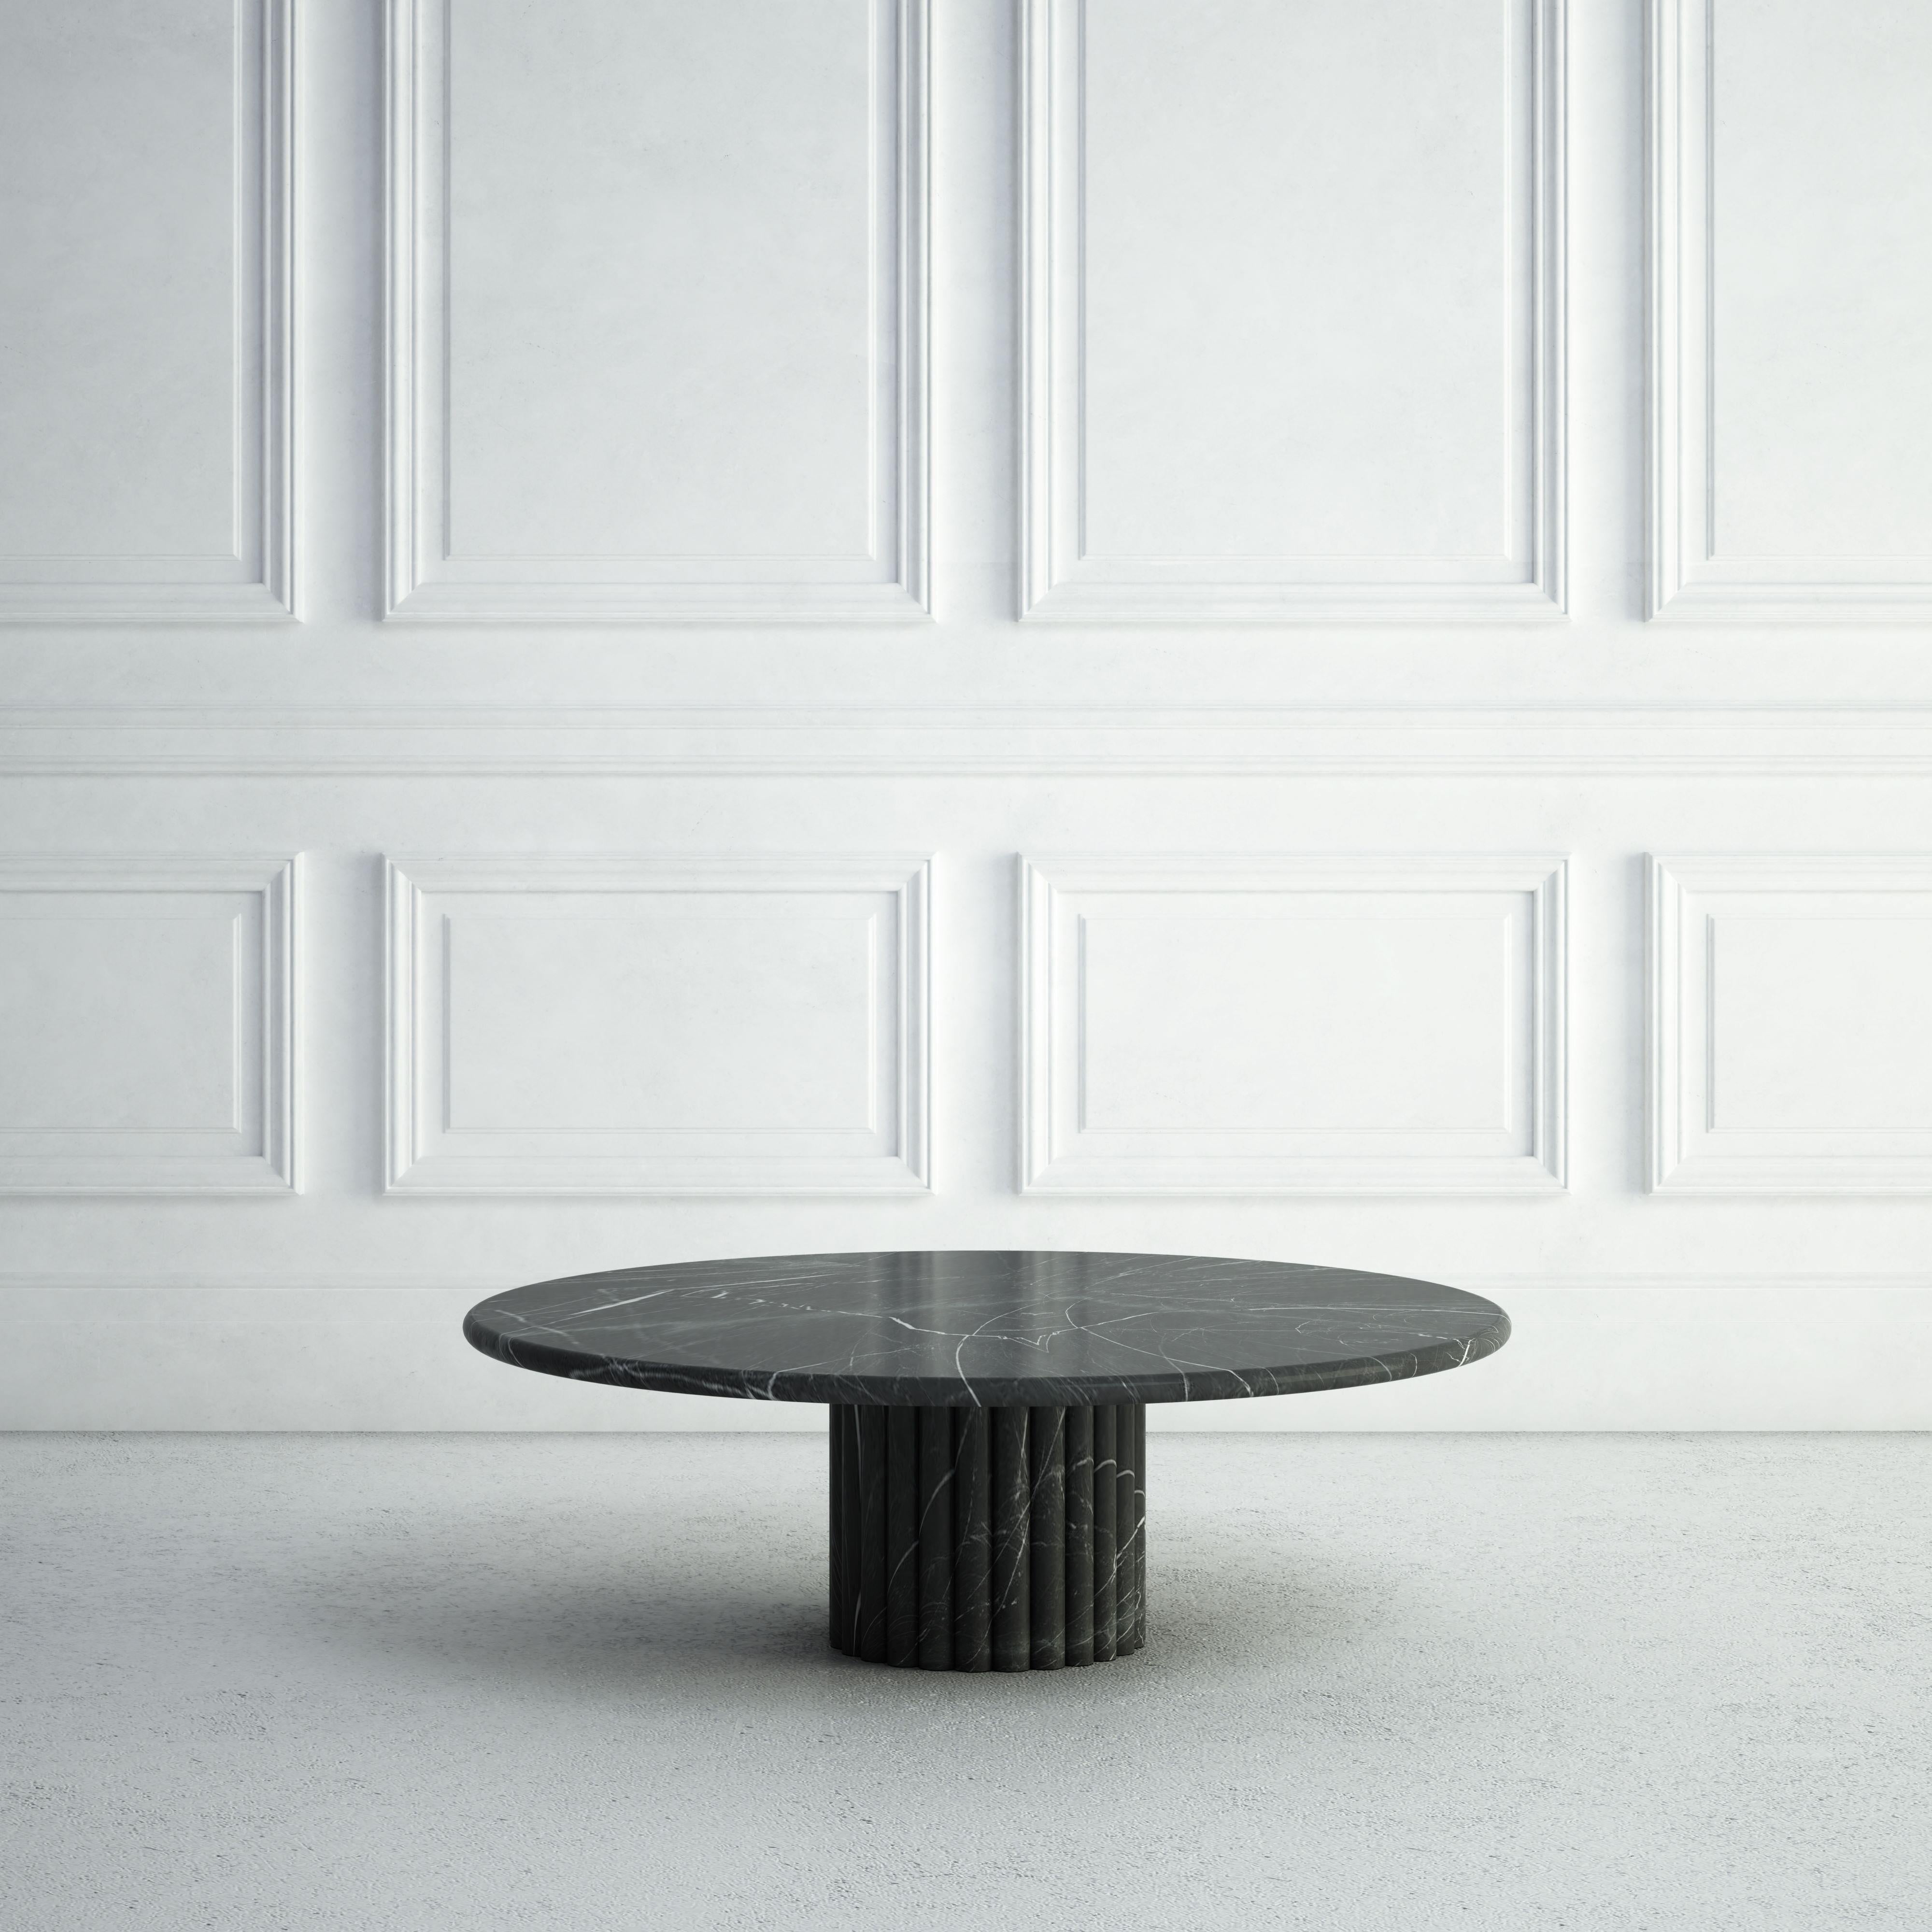 American The Lucie:  A Modern Stone Coffee Table with Round Top and Base For Sale